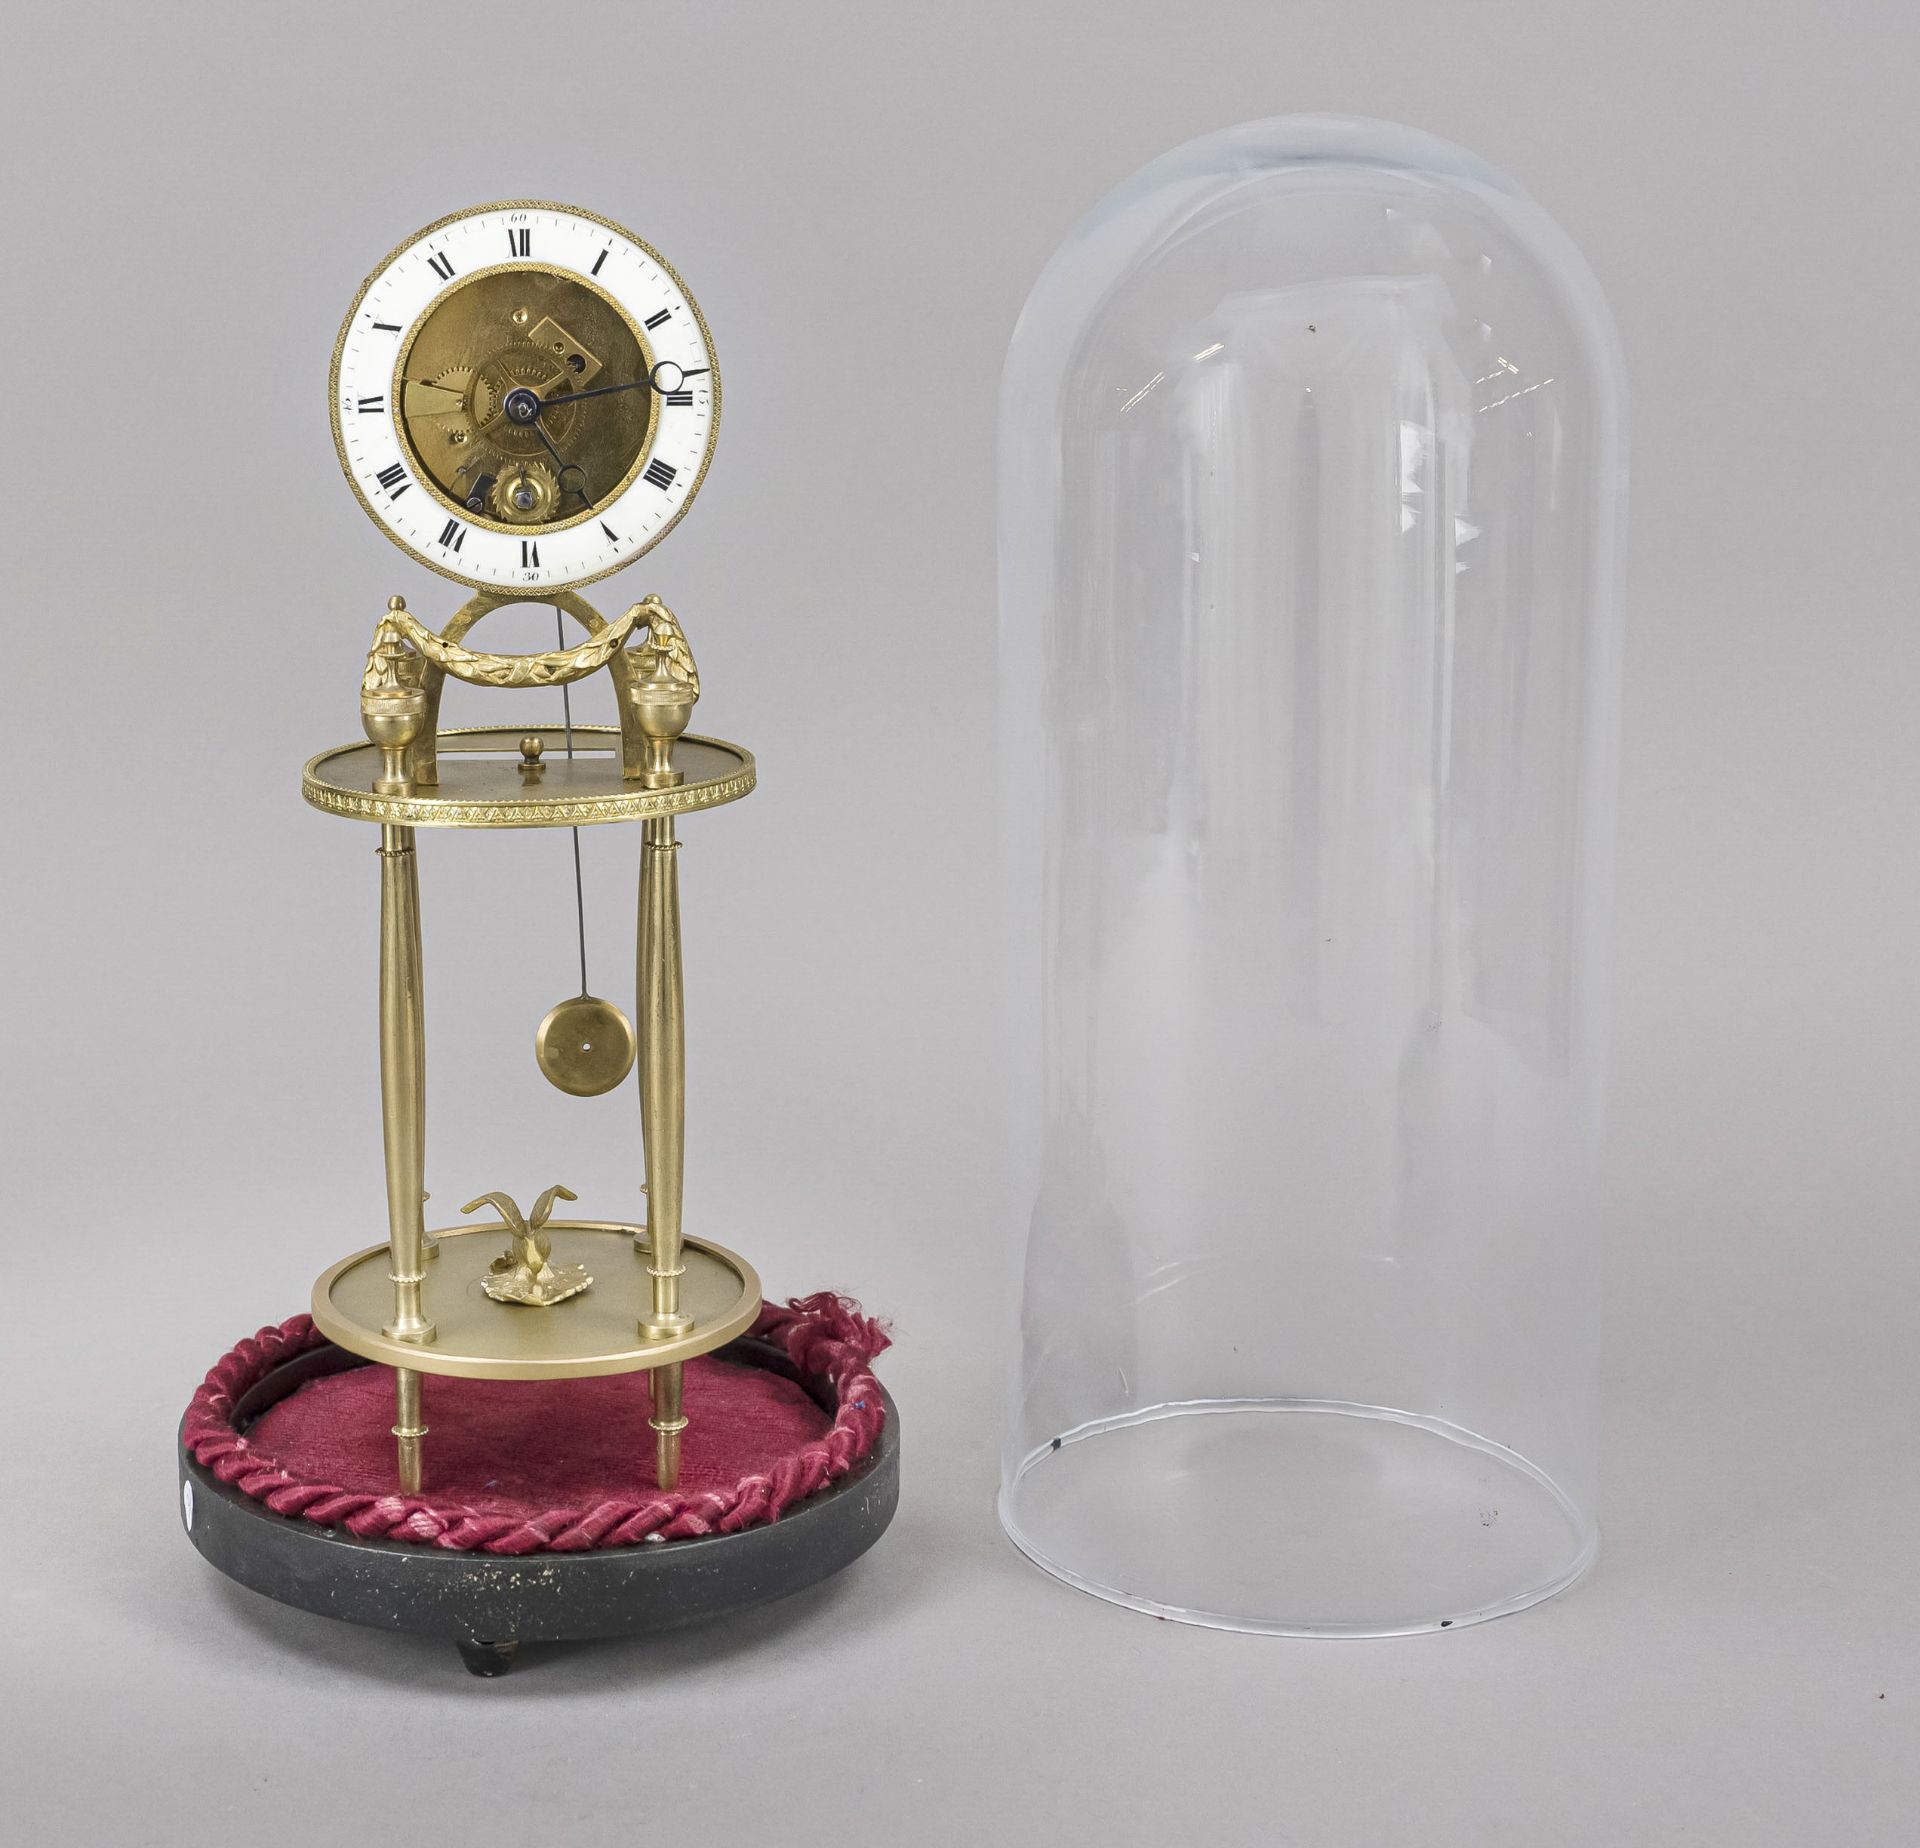 4 Column clock with base and glass dome, 1st half 19th century, gilt brass, decorated with - Image 2 of 2